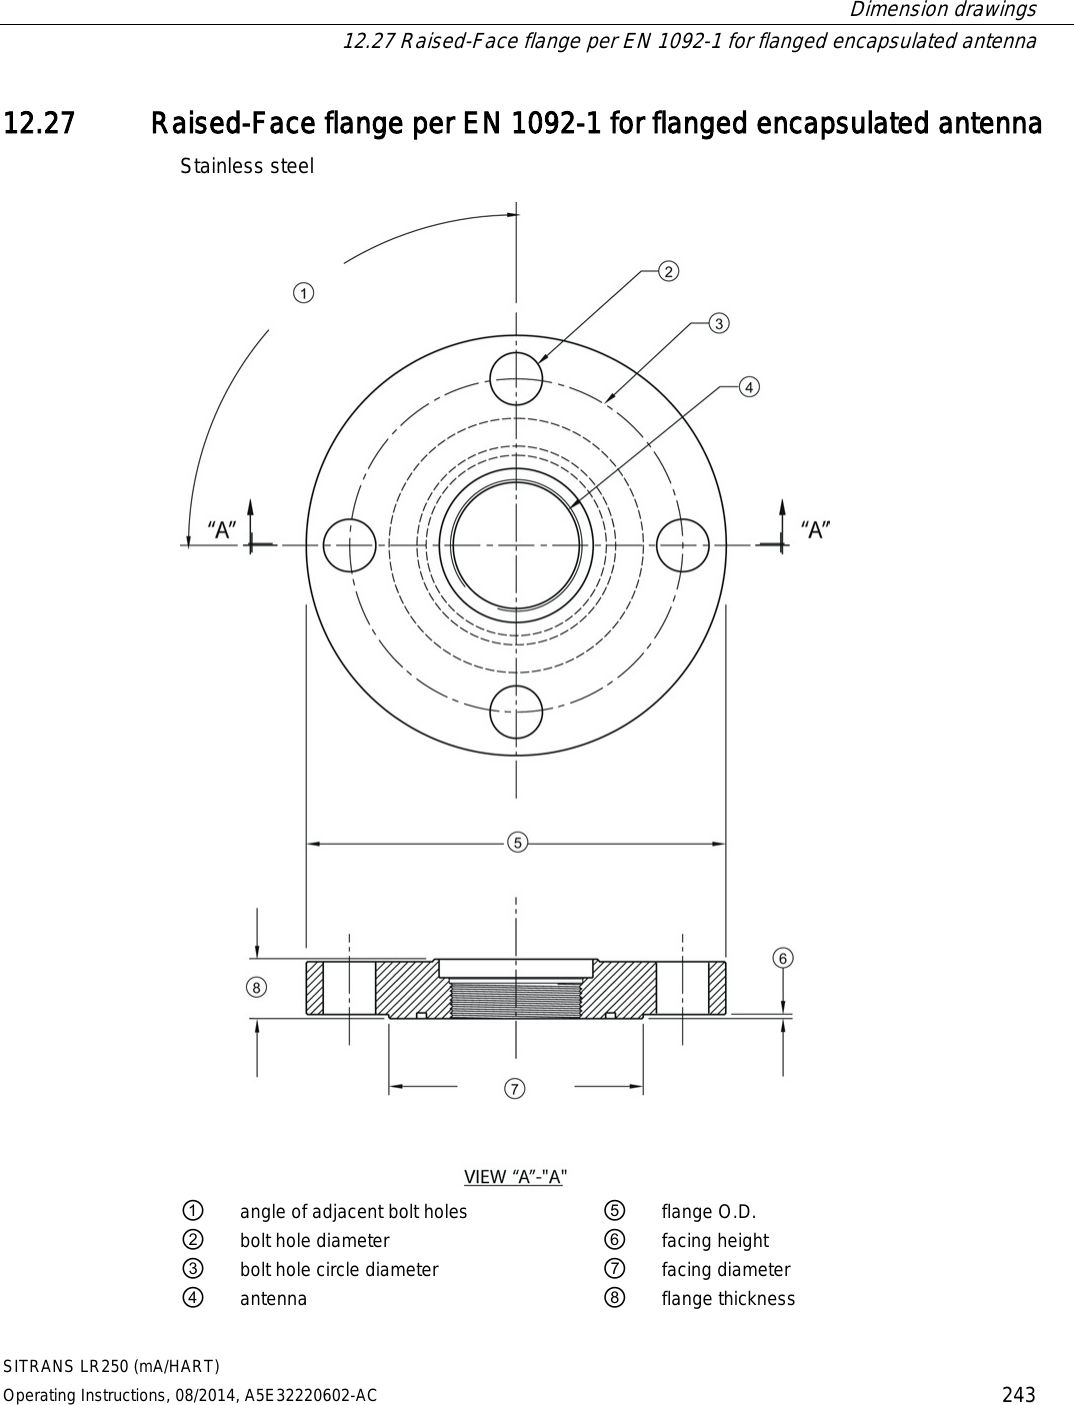  Dimension drawings  12.27 Raised-Face flange per EN 1092-1 for flanged encapsulated antenna SITRANS LR250 (mA/HART) Operating Instructions, 08/2014, A5E32220602-AC 243 12.27 Raised-Face flange per EN 1092-1 for flanged encapsulated antenna Stainless steel  ① angle of adjacent bolt holes ⑤ flange O.D. ② bolt hole diameter ⑥ facing height ③ bolt hole circle diameter ⑦ facing diameter ④ antenna ⑧ flange thickness 